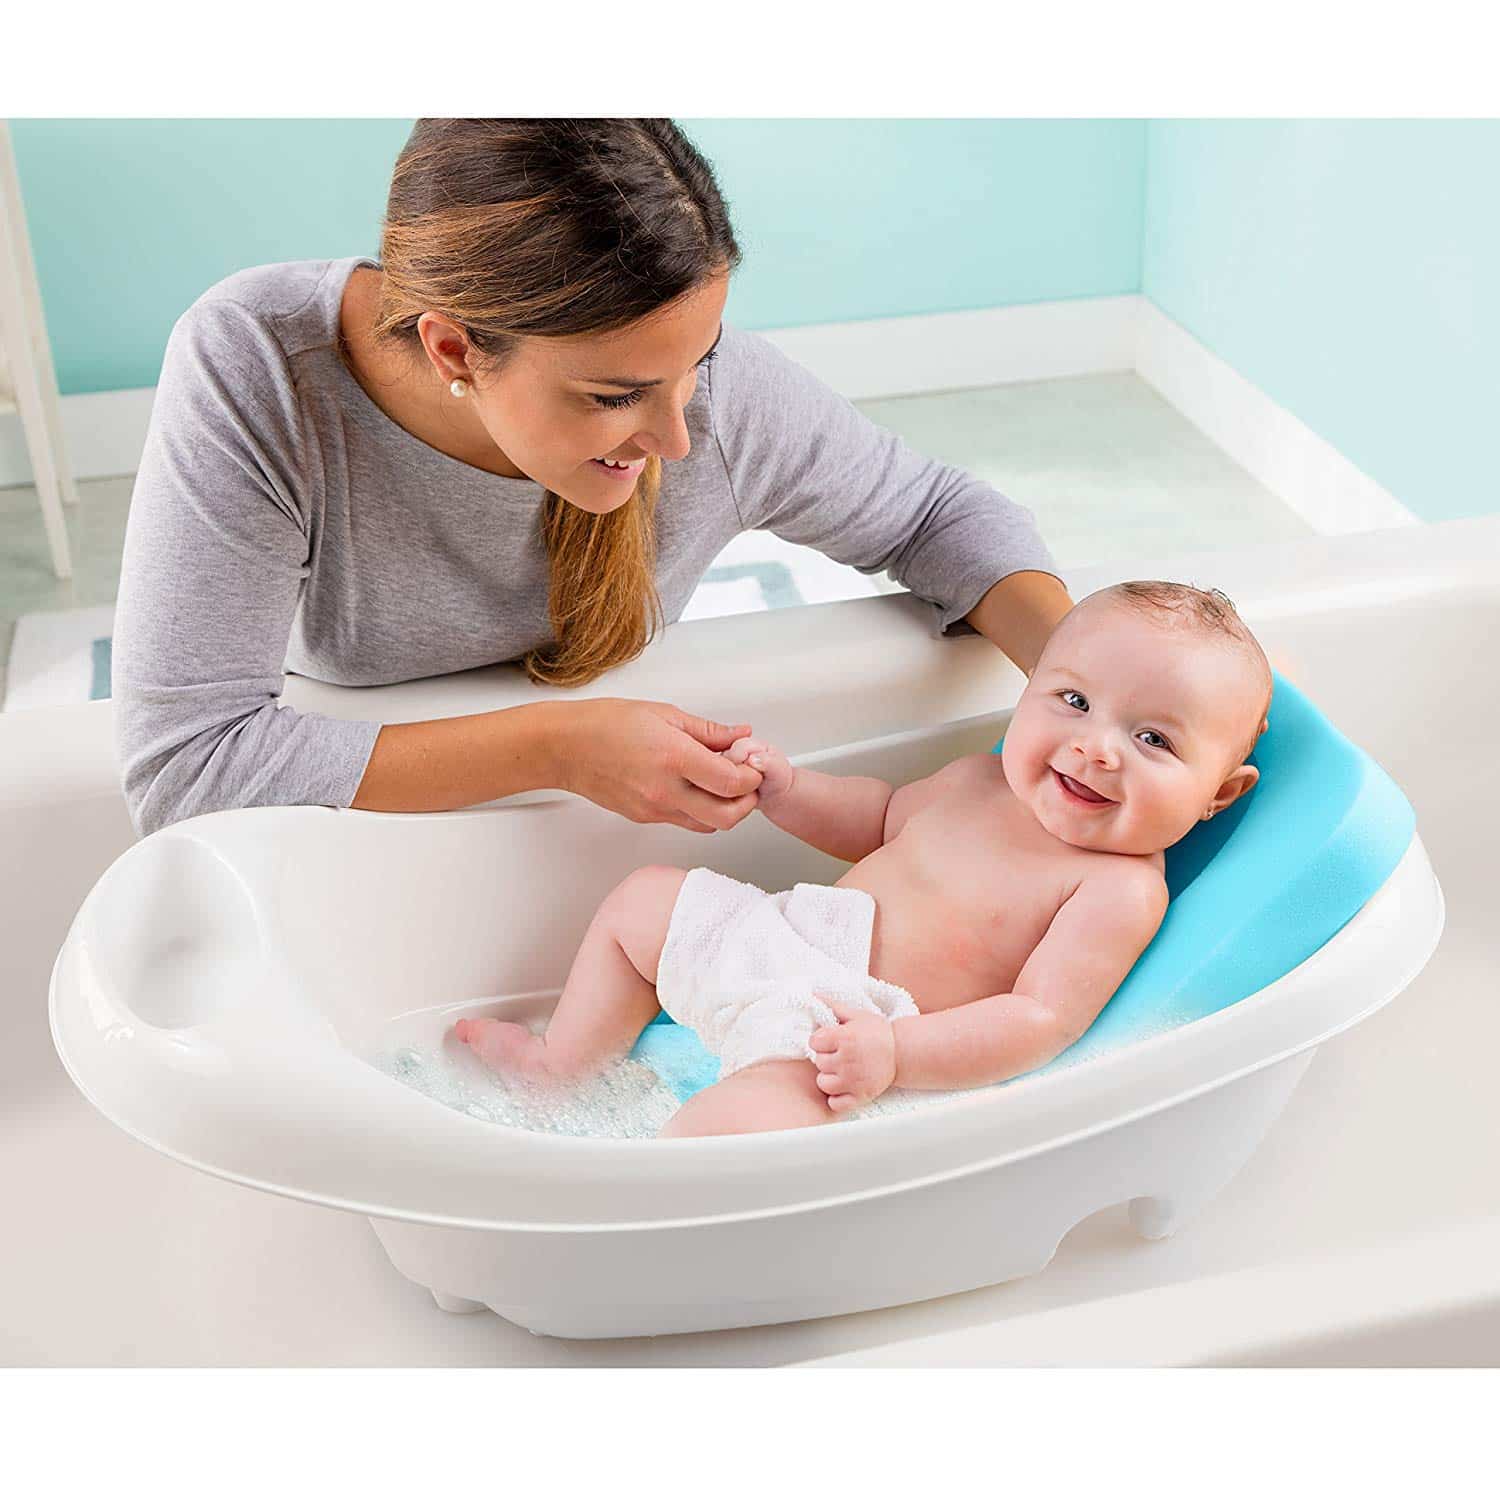 How To Use Fisher Price Baby Bath Tub / Fisher